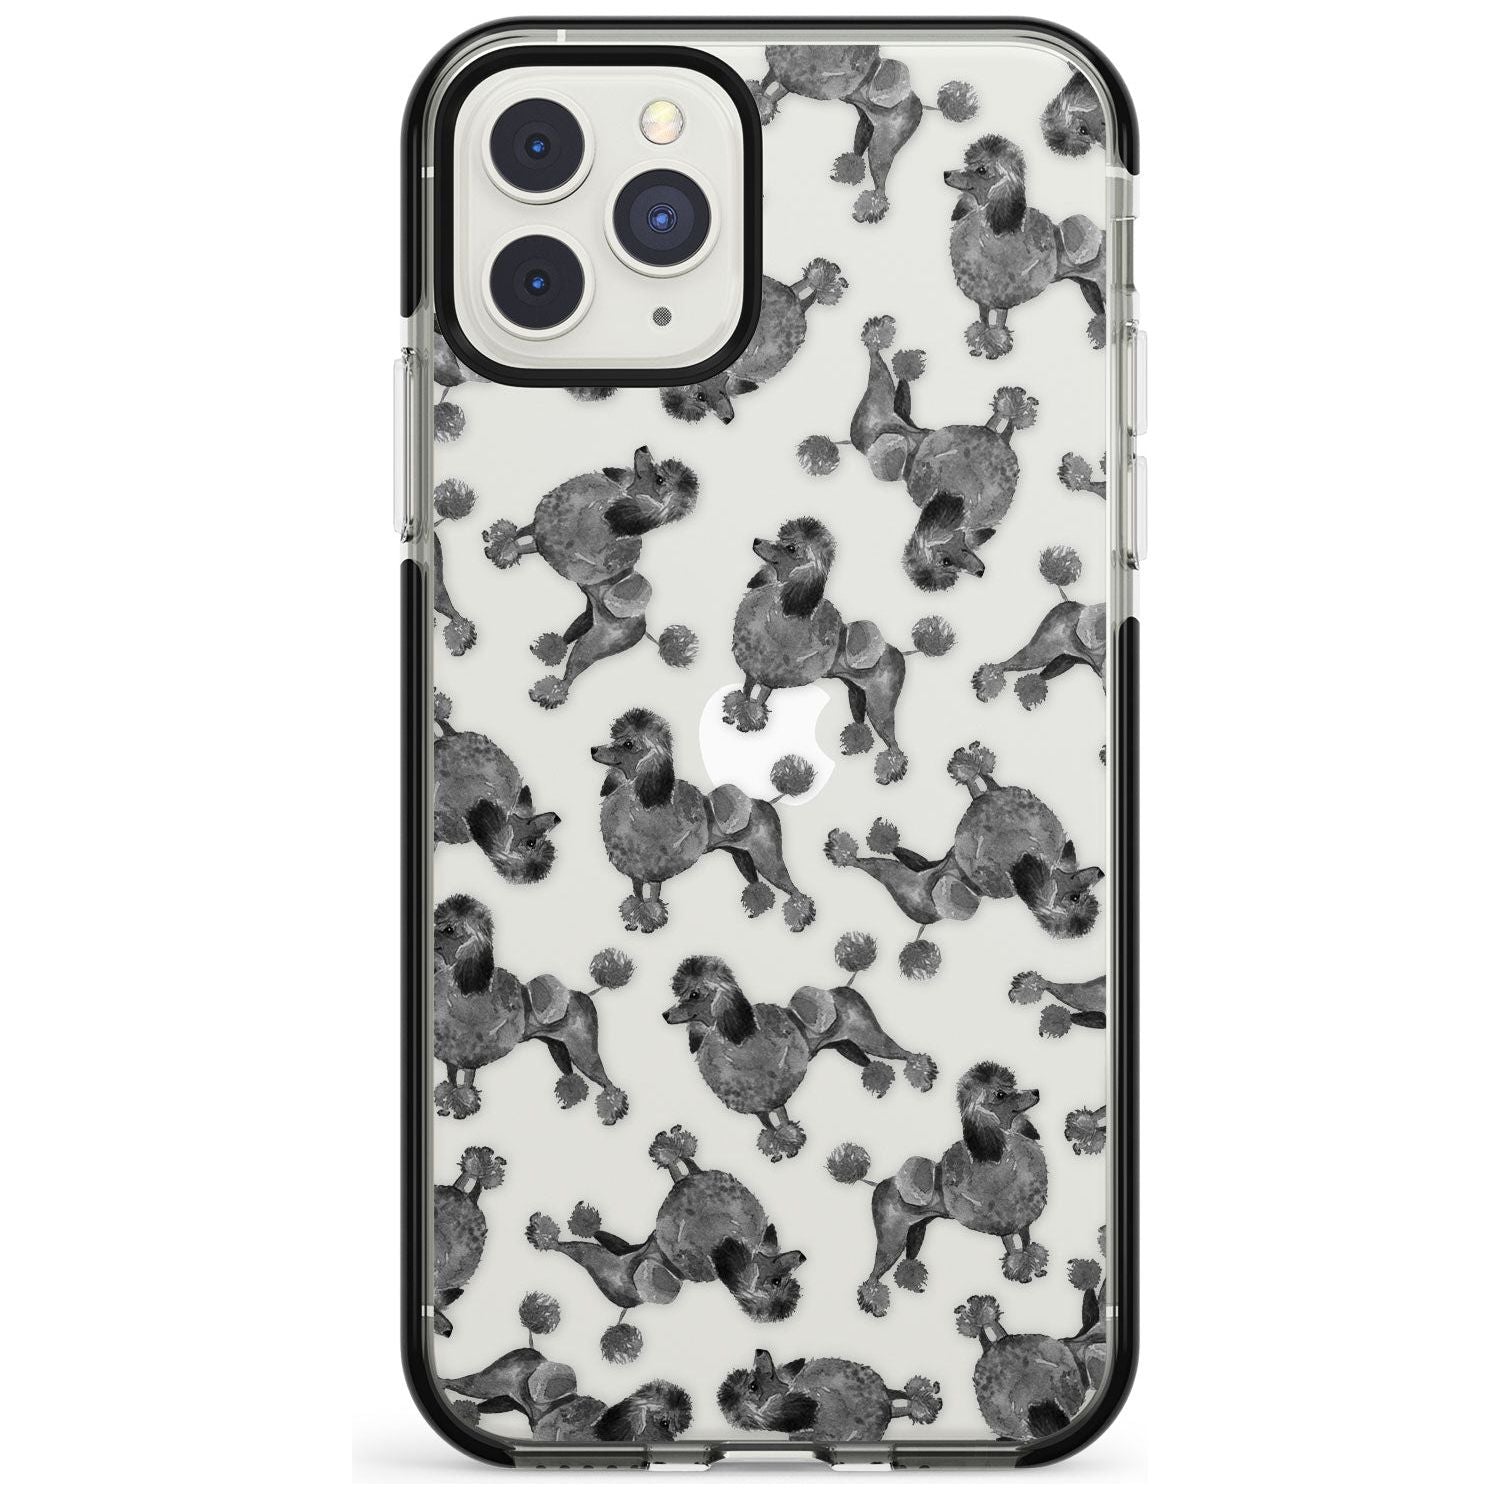 Poodle (Black) Watercolour Dog Pattern Black Impact Phone Case for iPhone 11 Pro Max